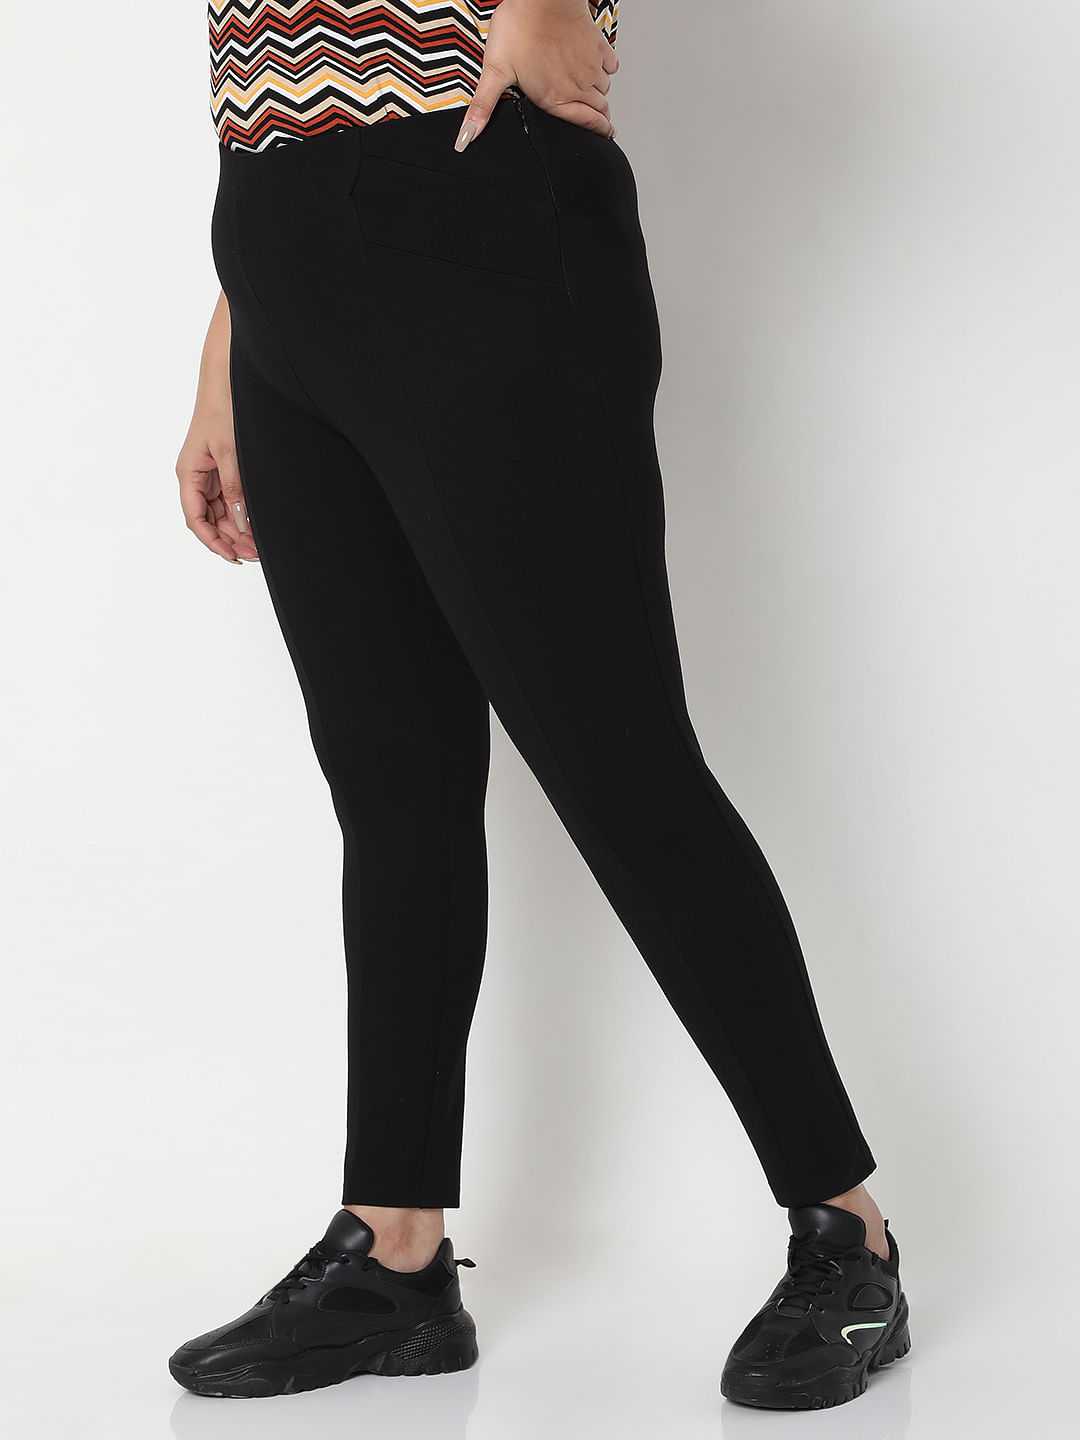 The Best Black Leggings | Pear Shaped Body - Lipgloss and Crayons